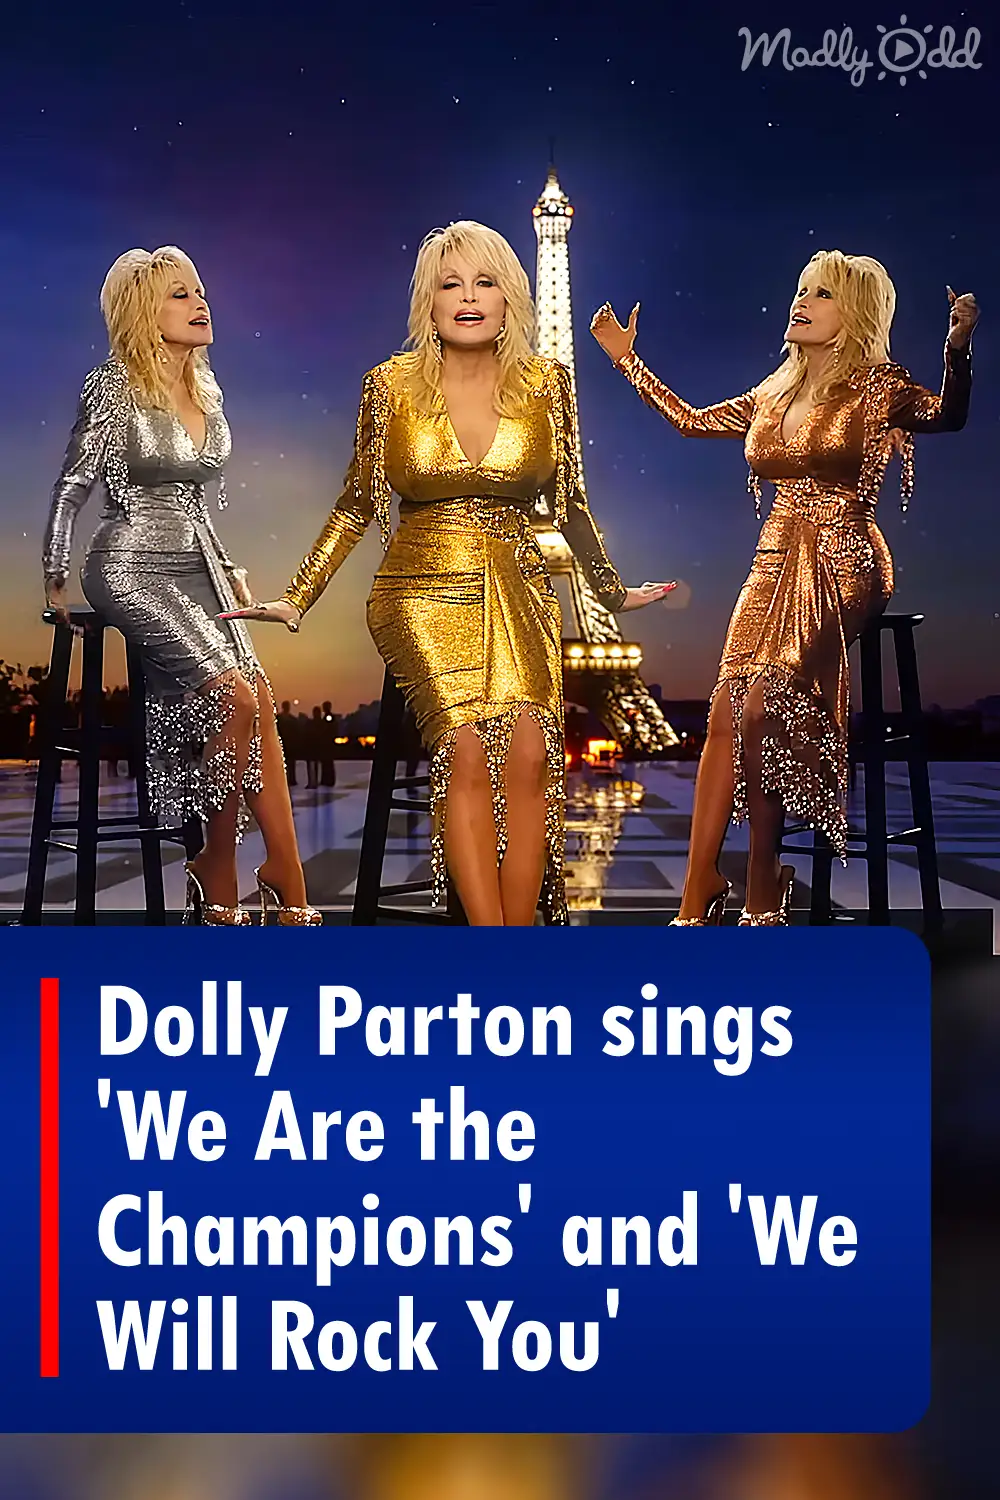 Dolly Parton sings 'We Are the Champions' and 'We Will Rock You'